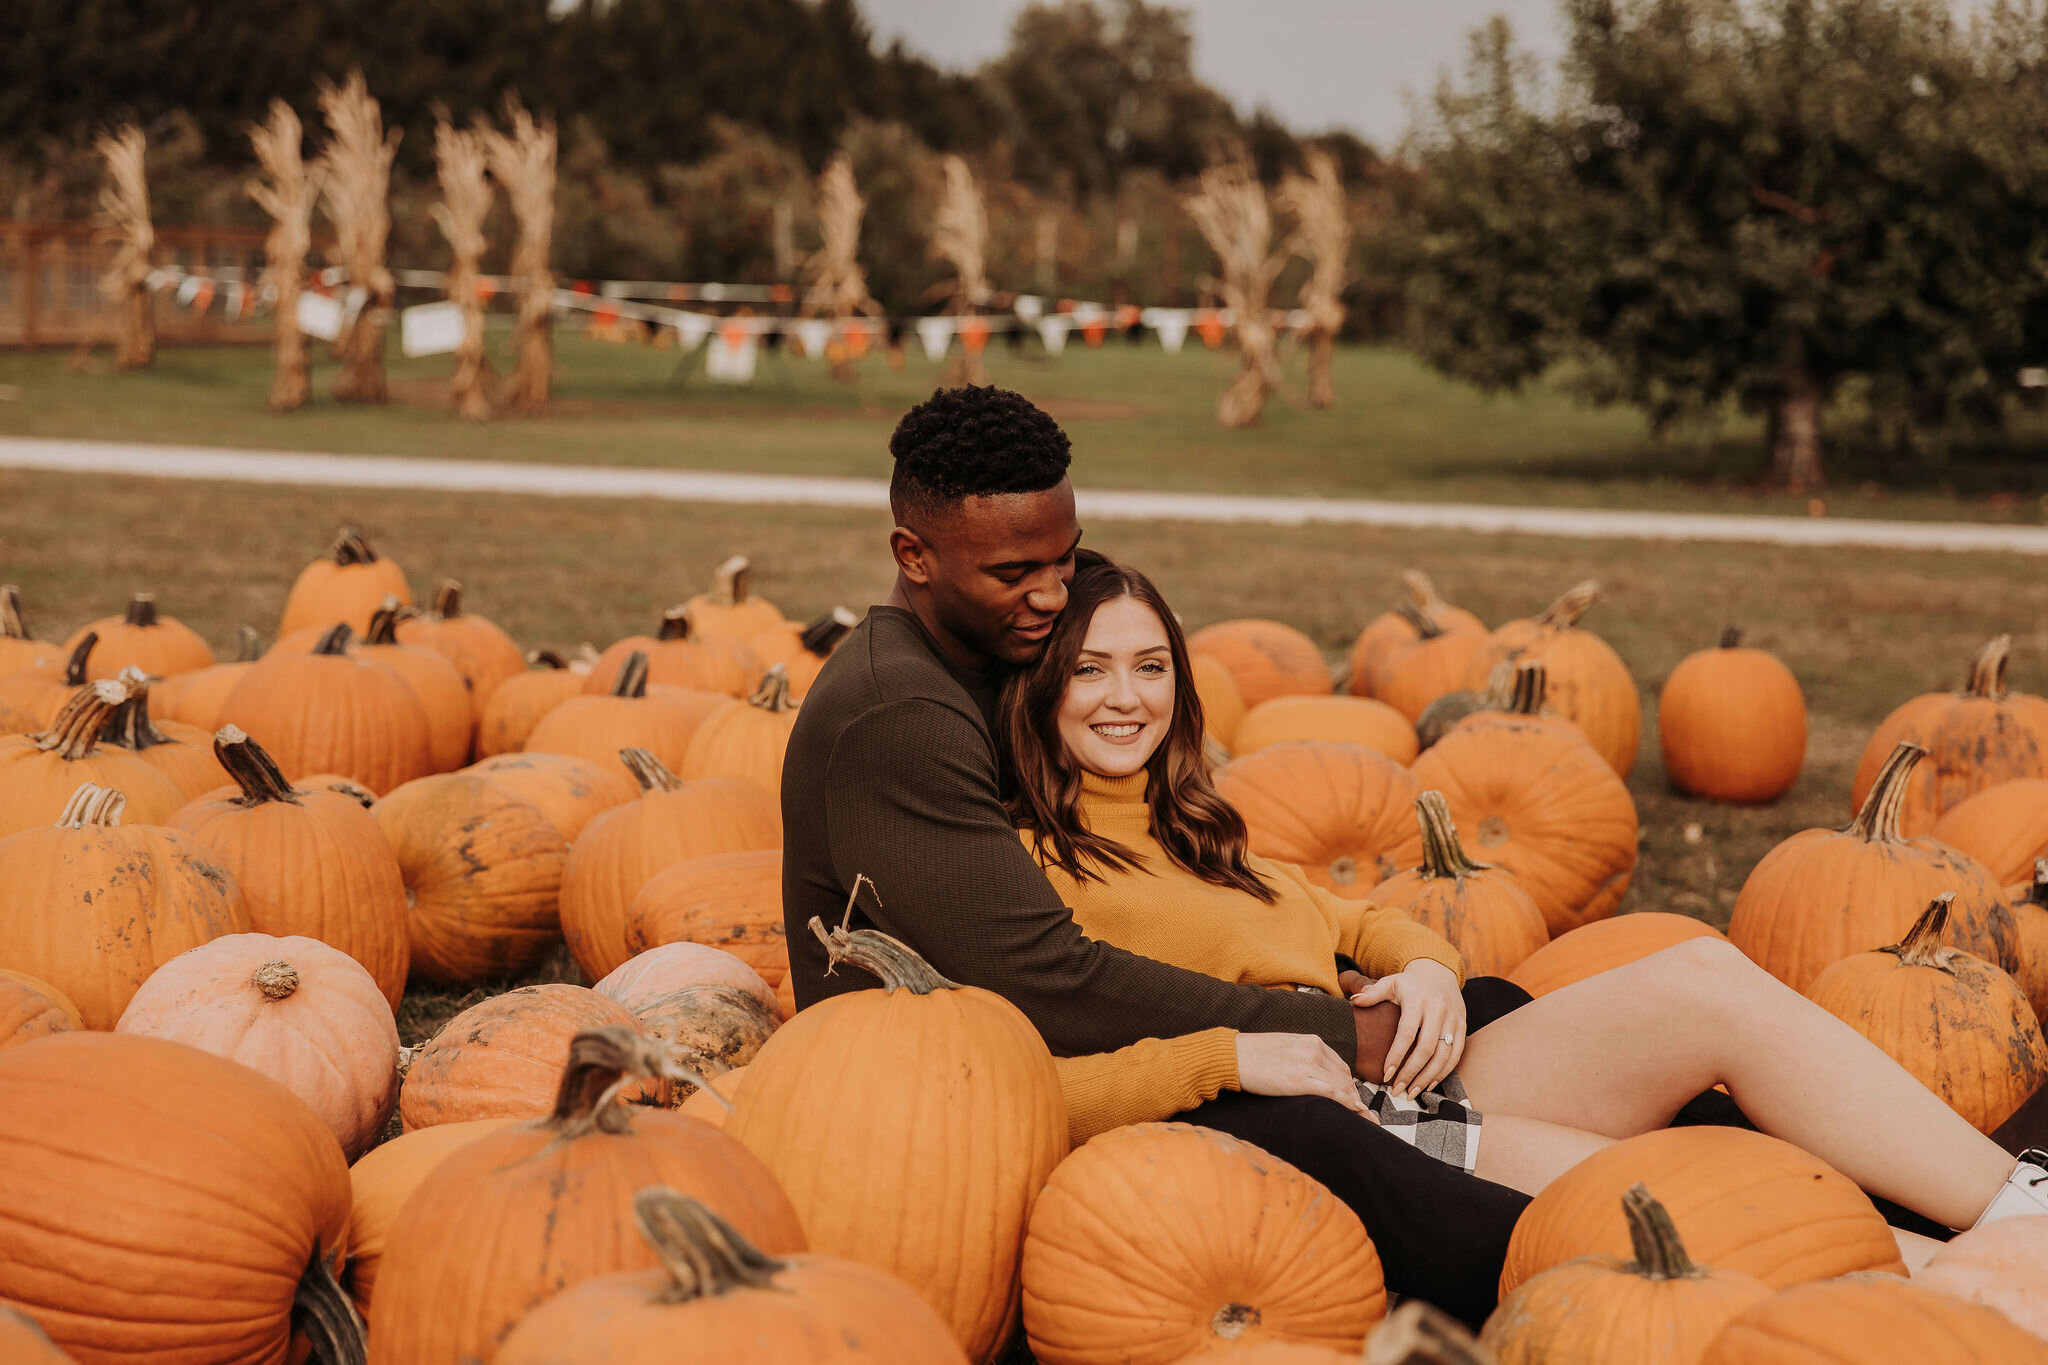 Fall Orchard Engagement Session captured by Hello Hana LLC featured on CHI thee WED